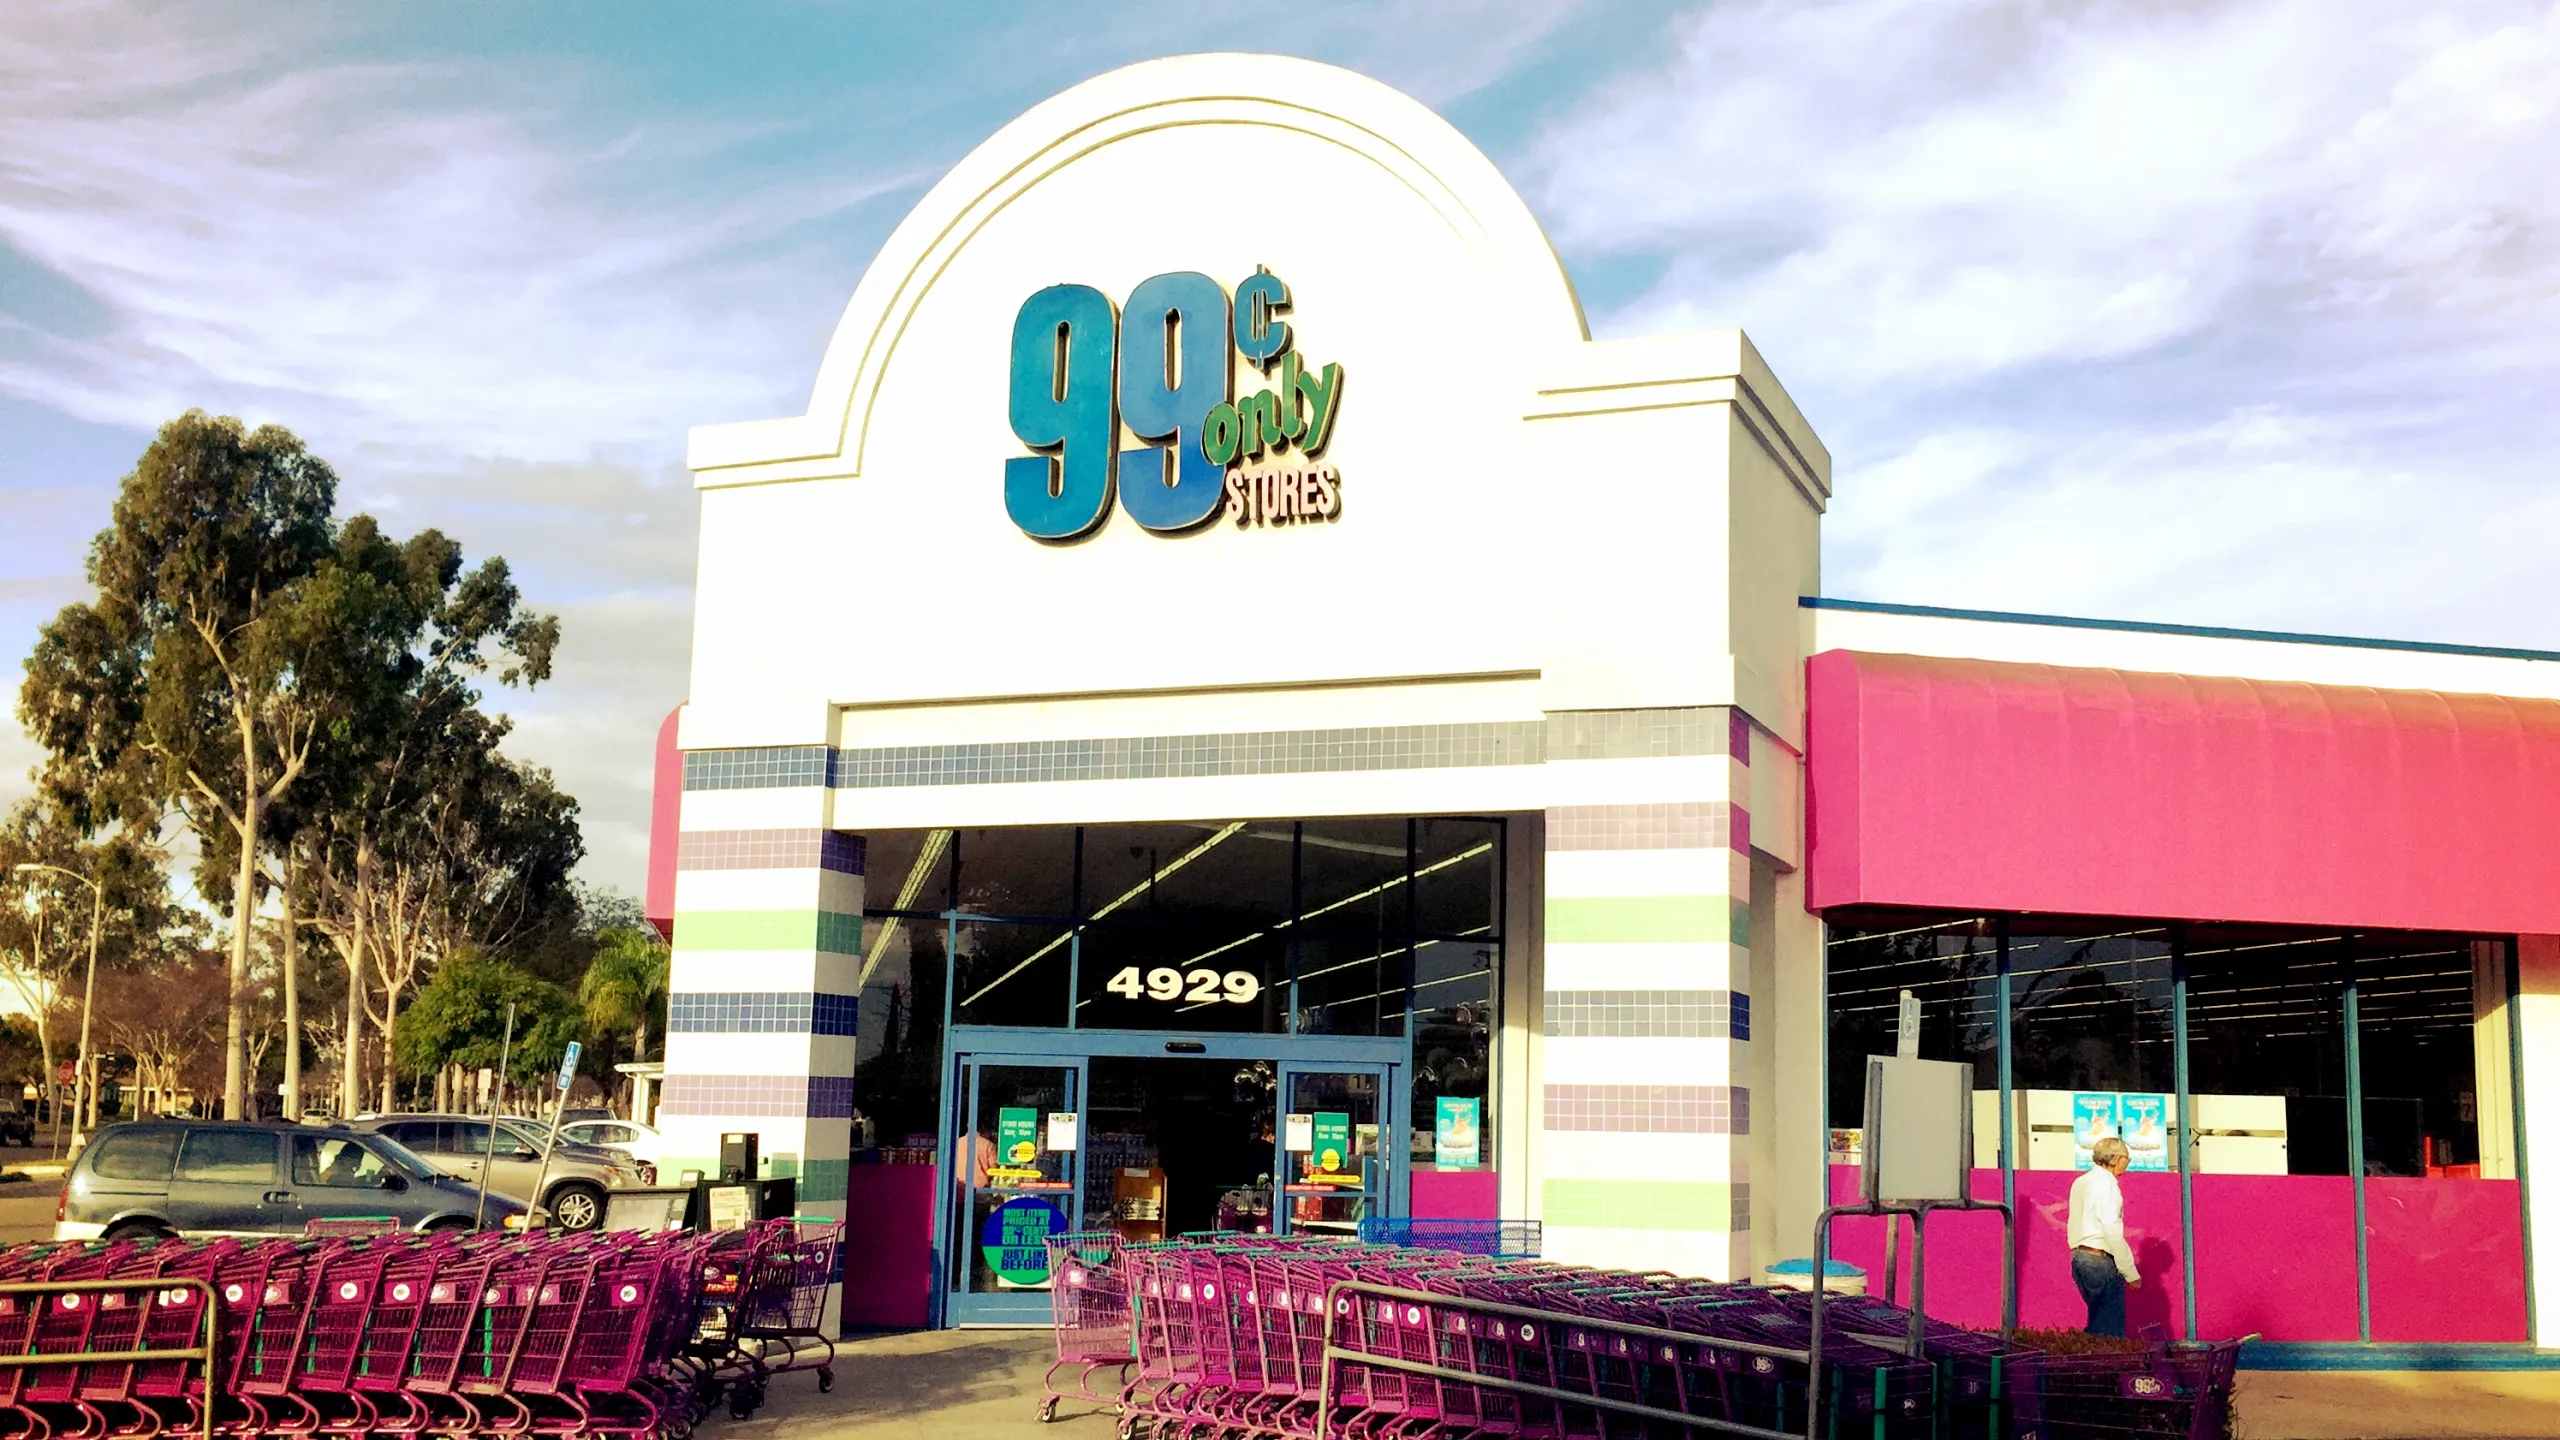 Say What Now? 99 Cents Only Stores Closing All 371 Locations, Liquidation Sales Starting Friday